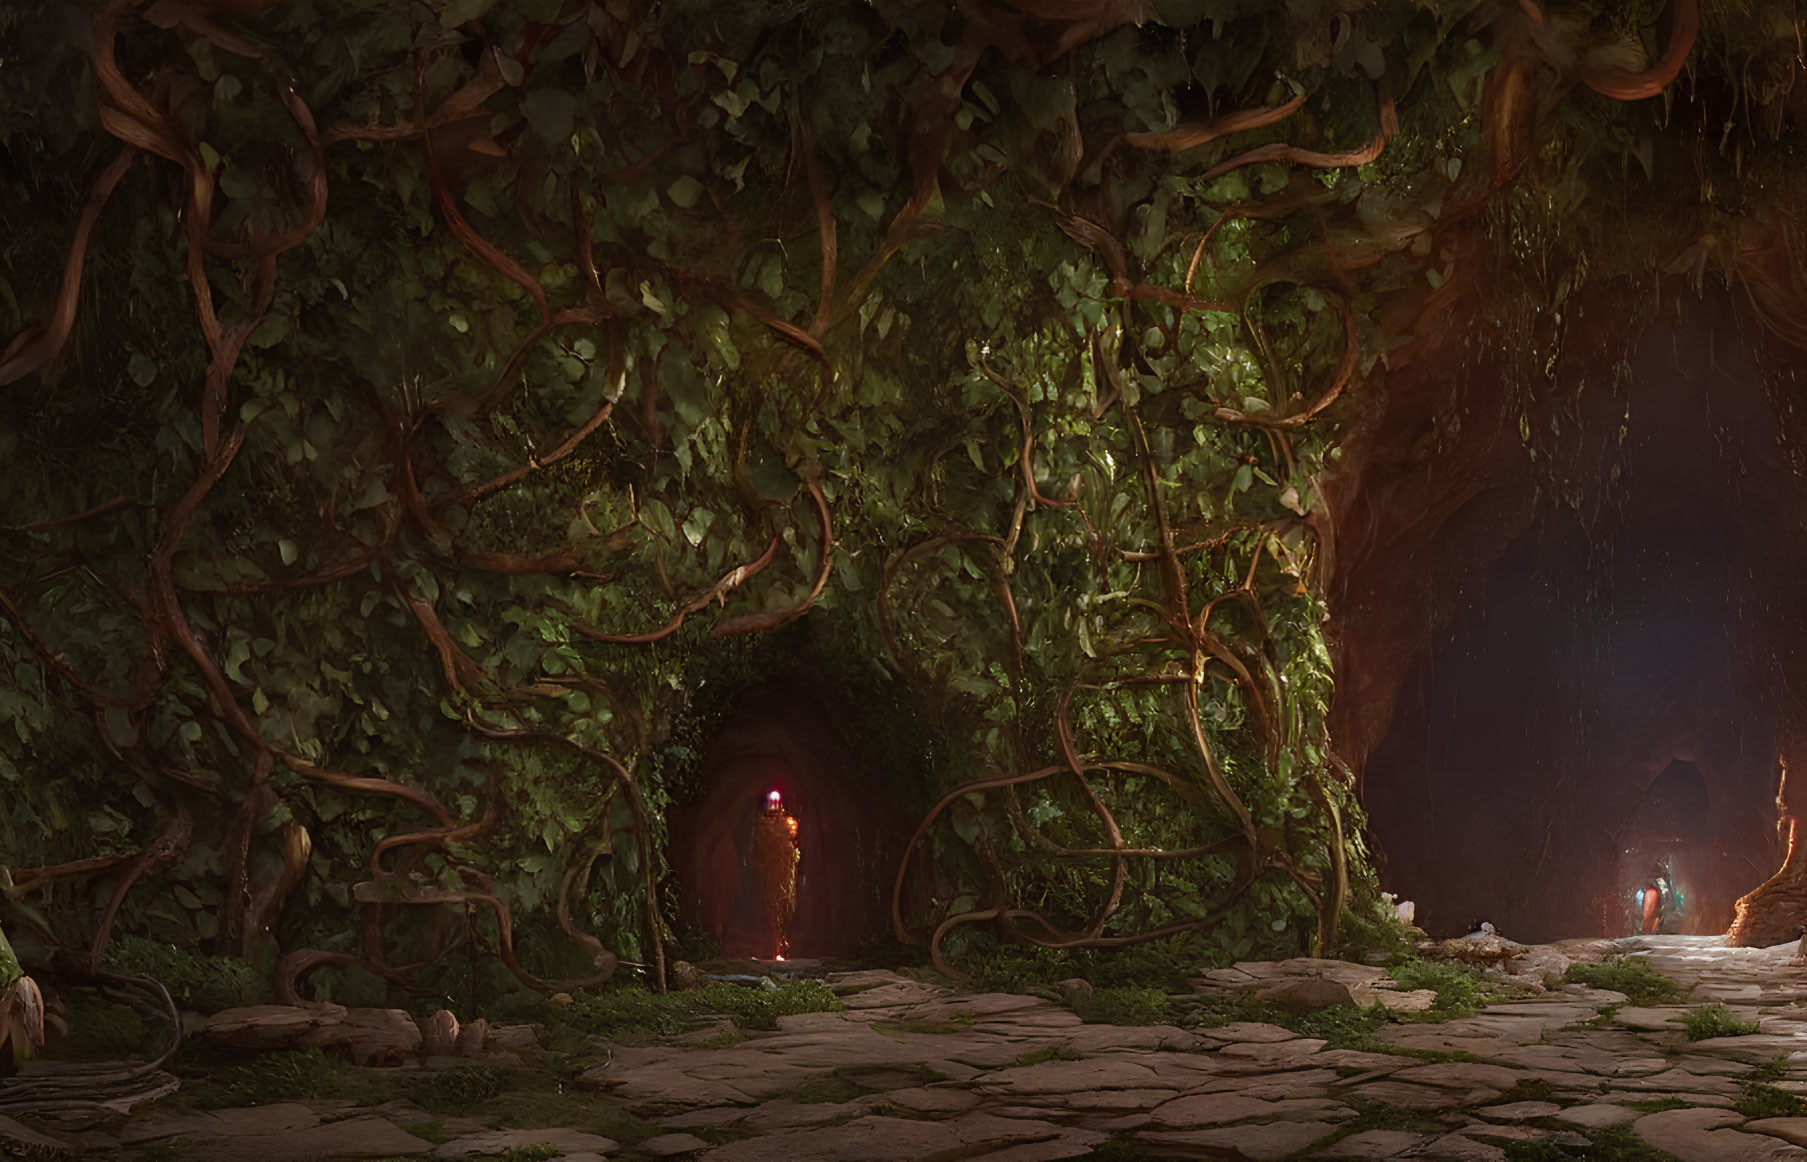 Ethereal forest scene with mystical cave entrance and glowing light